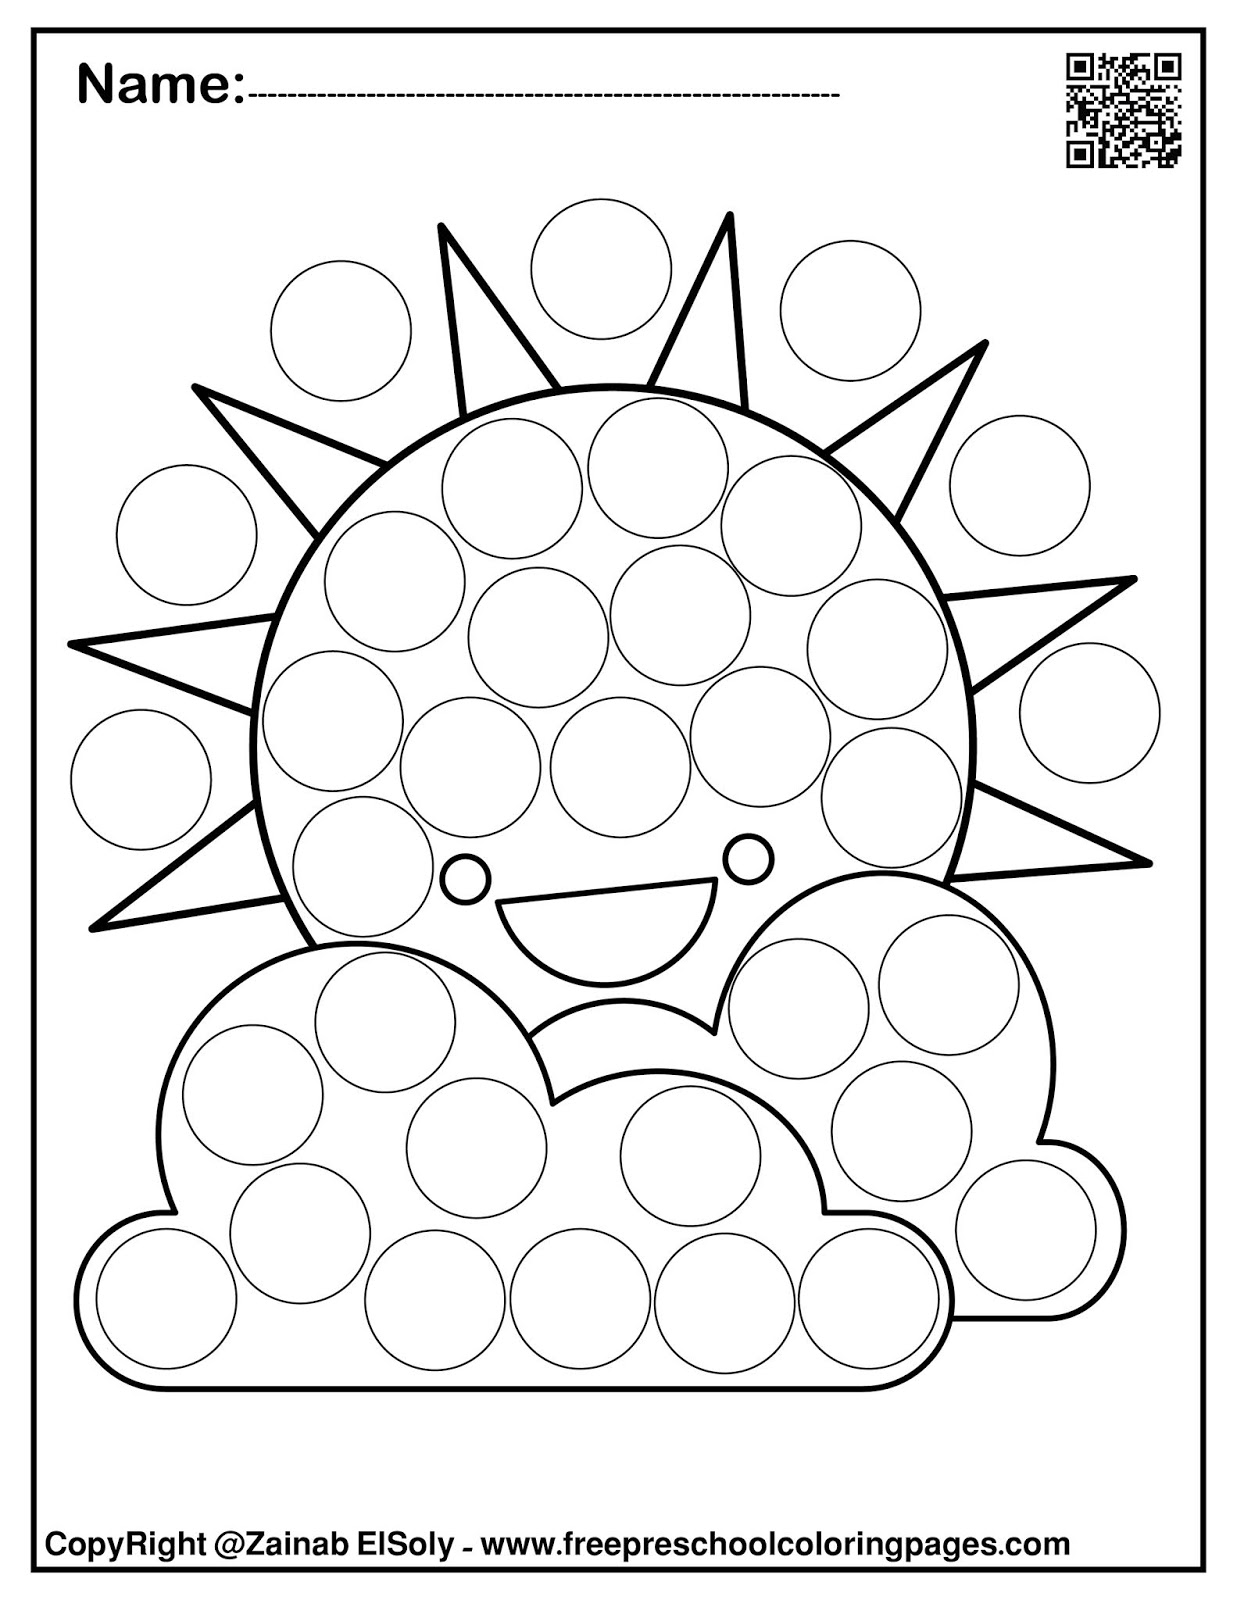 19-dot-marker-coloring-pages-free-free-printable-coloring-pages